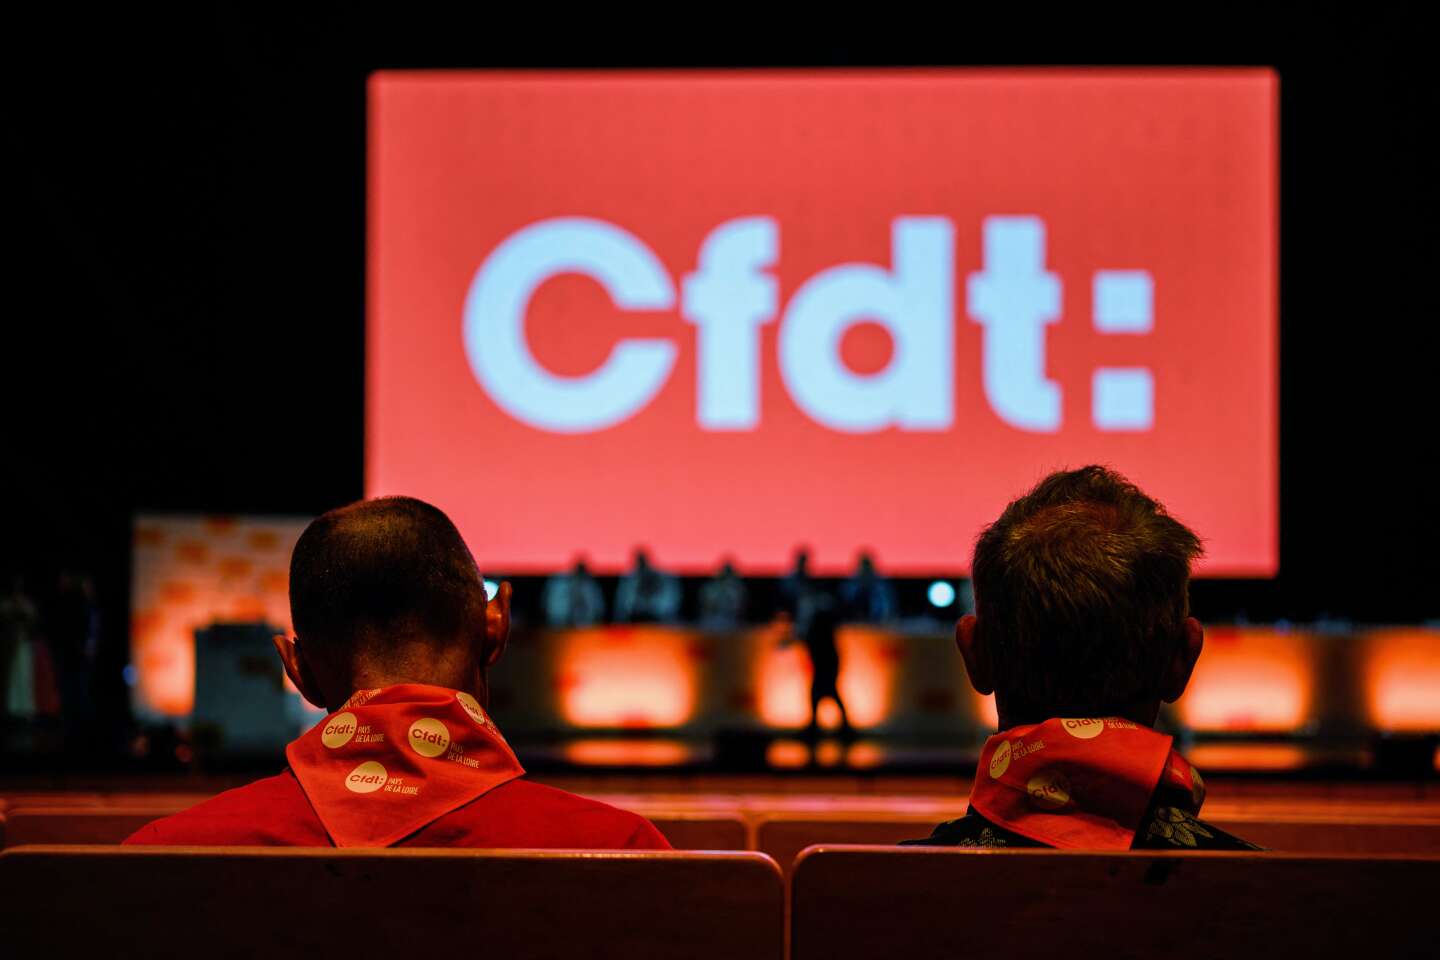 Pensions: The CFDT tightens its doctrine